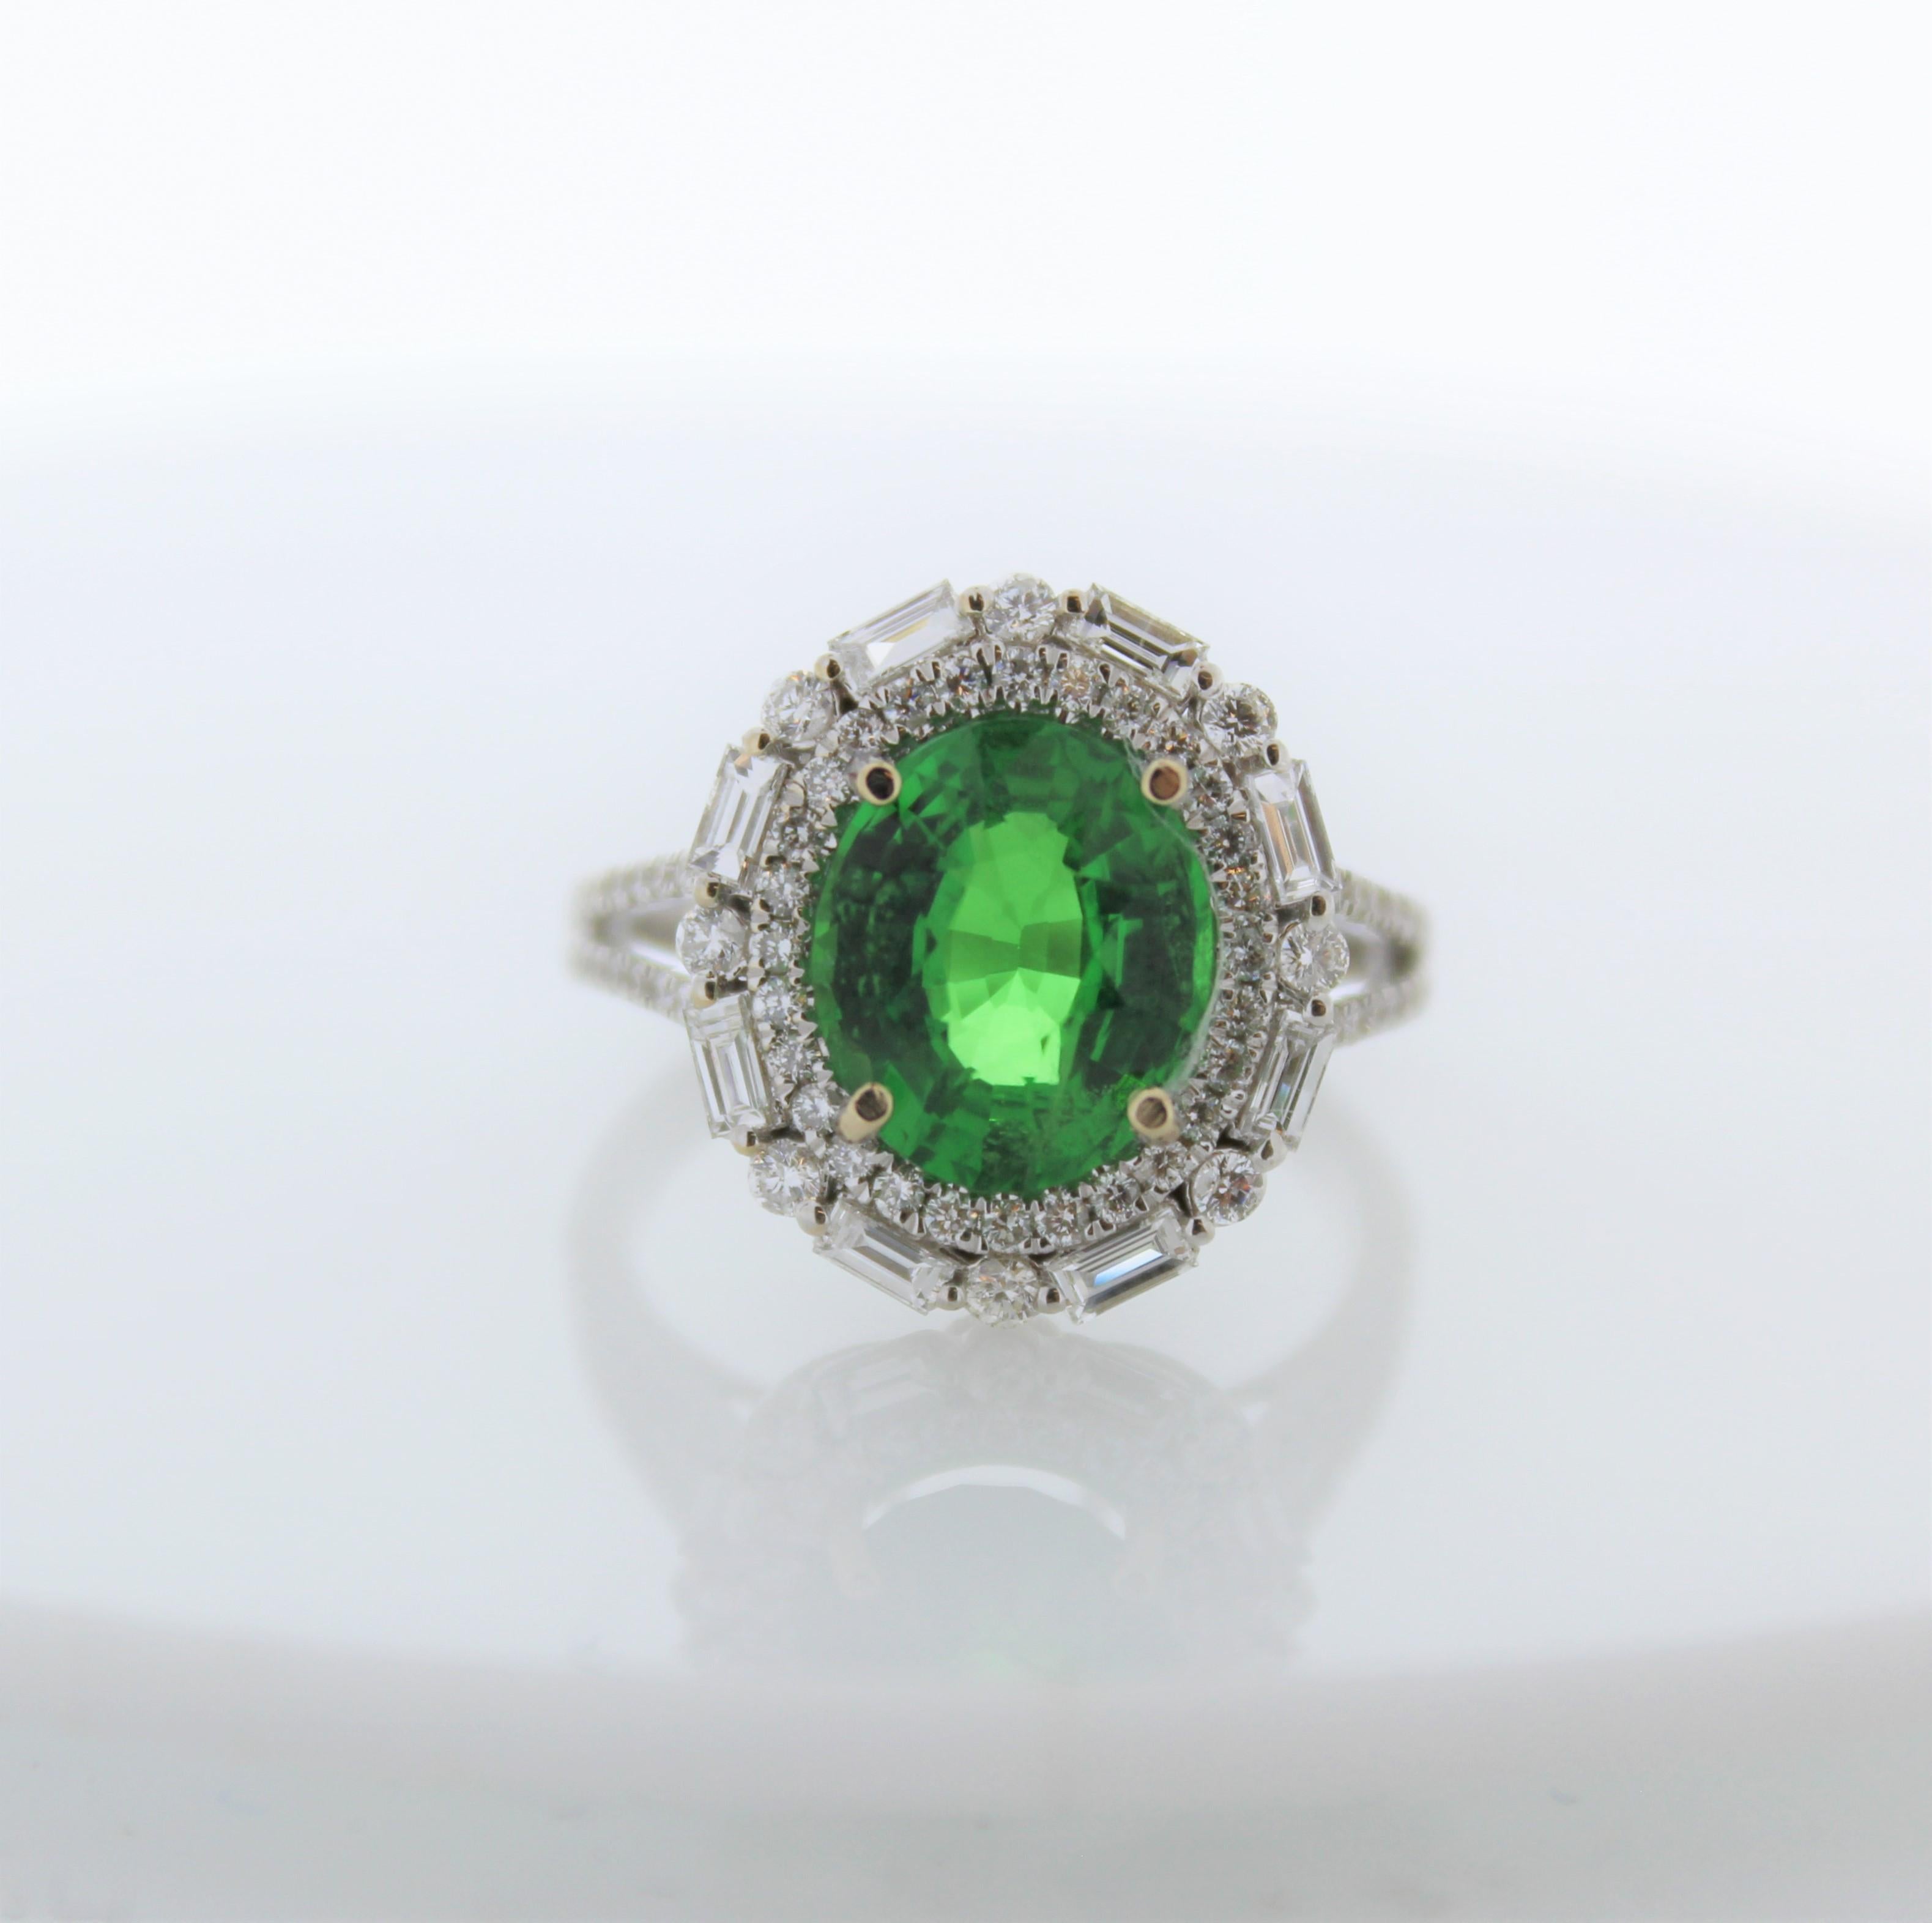 This ring holds a vibrant green tsavorite garnet from Tanzania. The weight of this tsavorite is 3.54 carats. Its luster and transparency are excellent. 84 sparkling mixed cut diamonds surround this tsavorite in a glittering halo cluster and down the